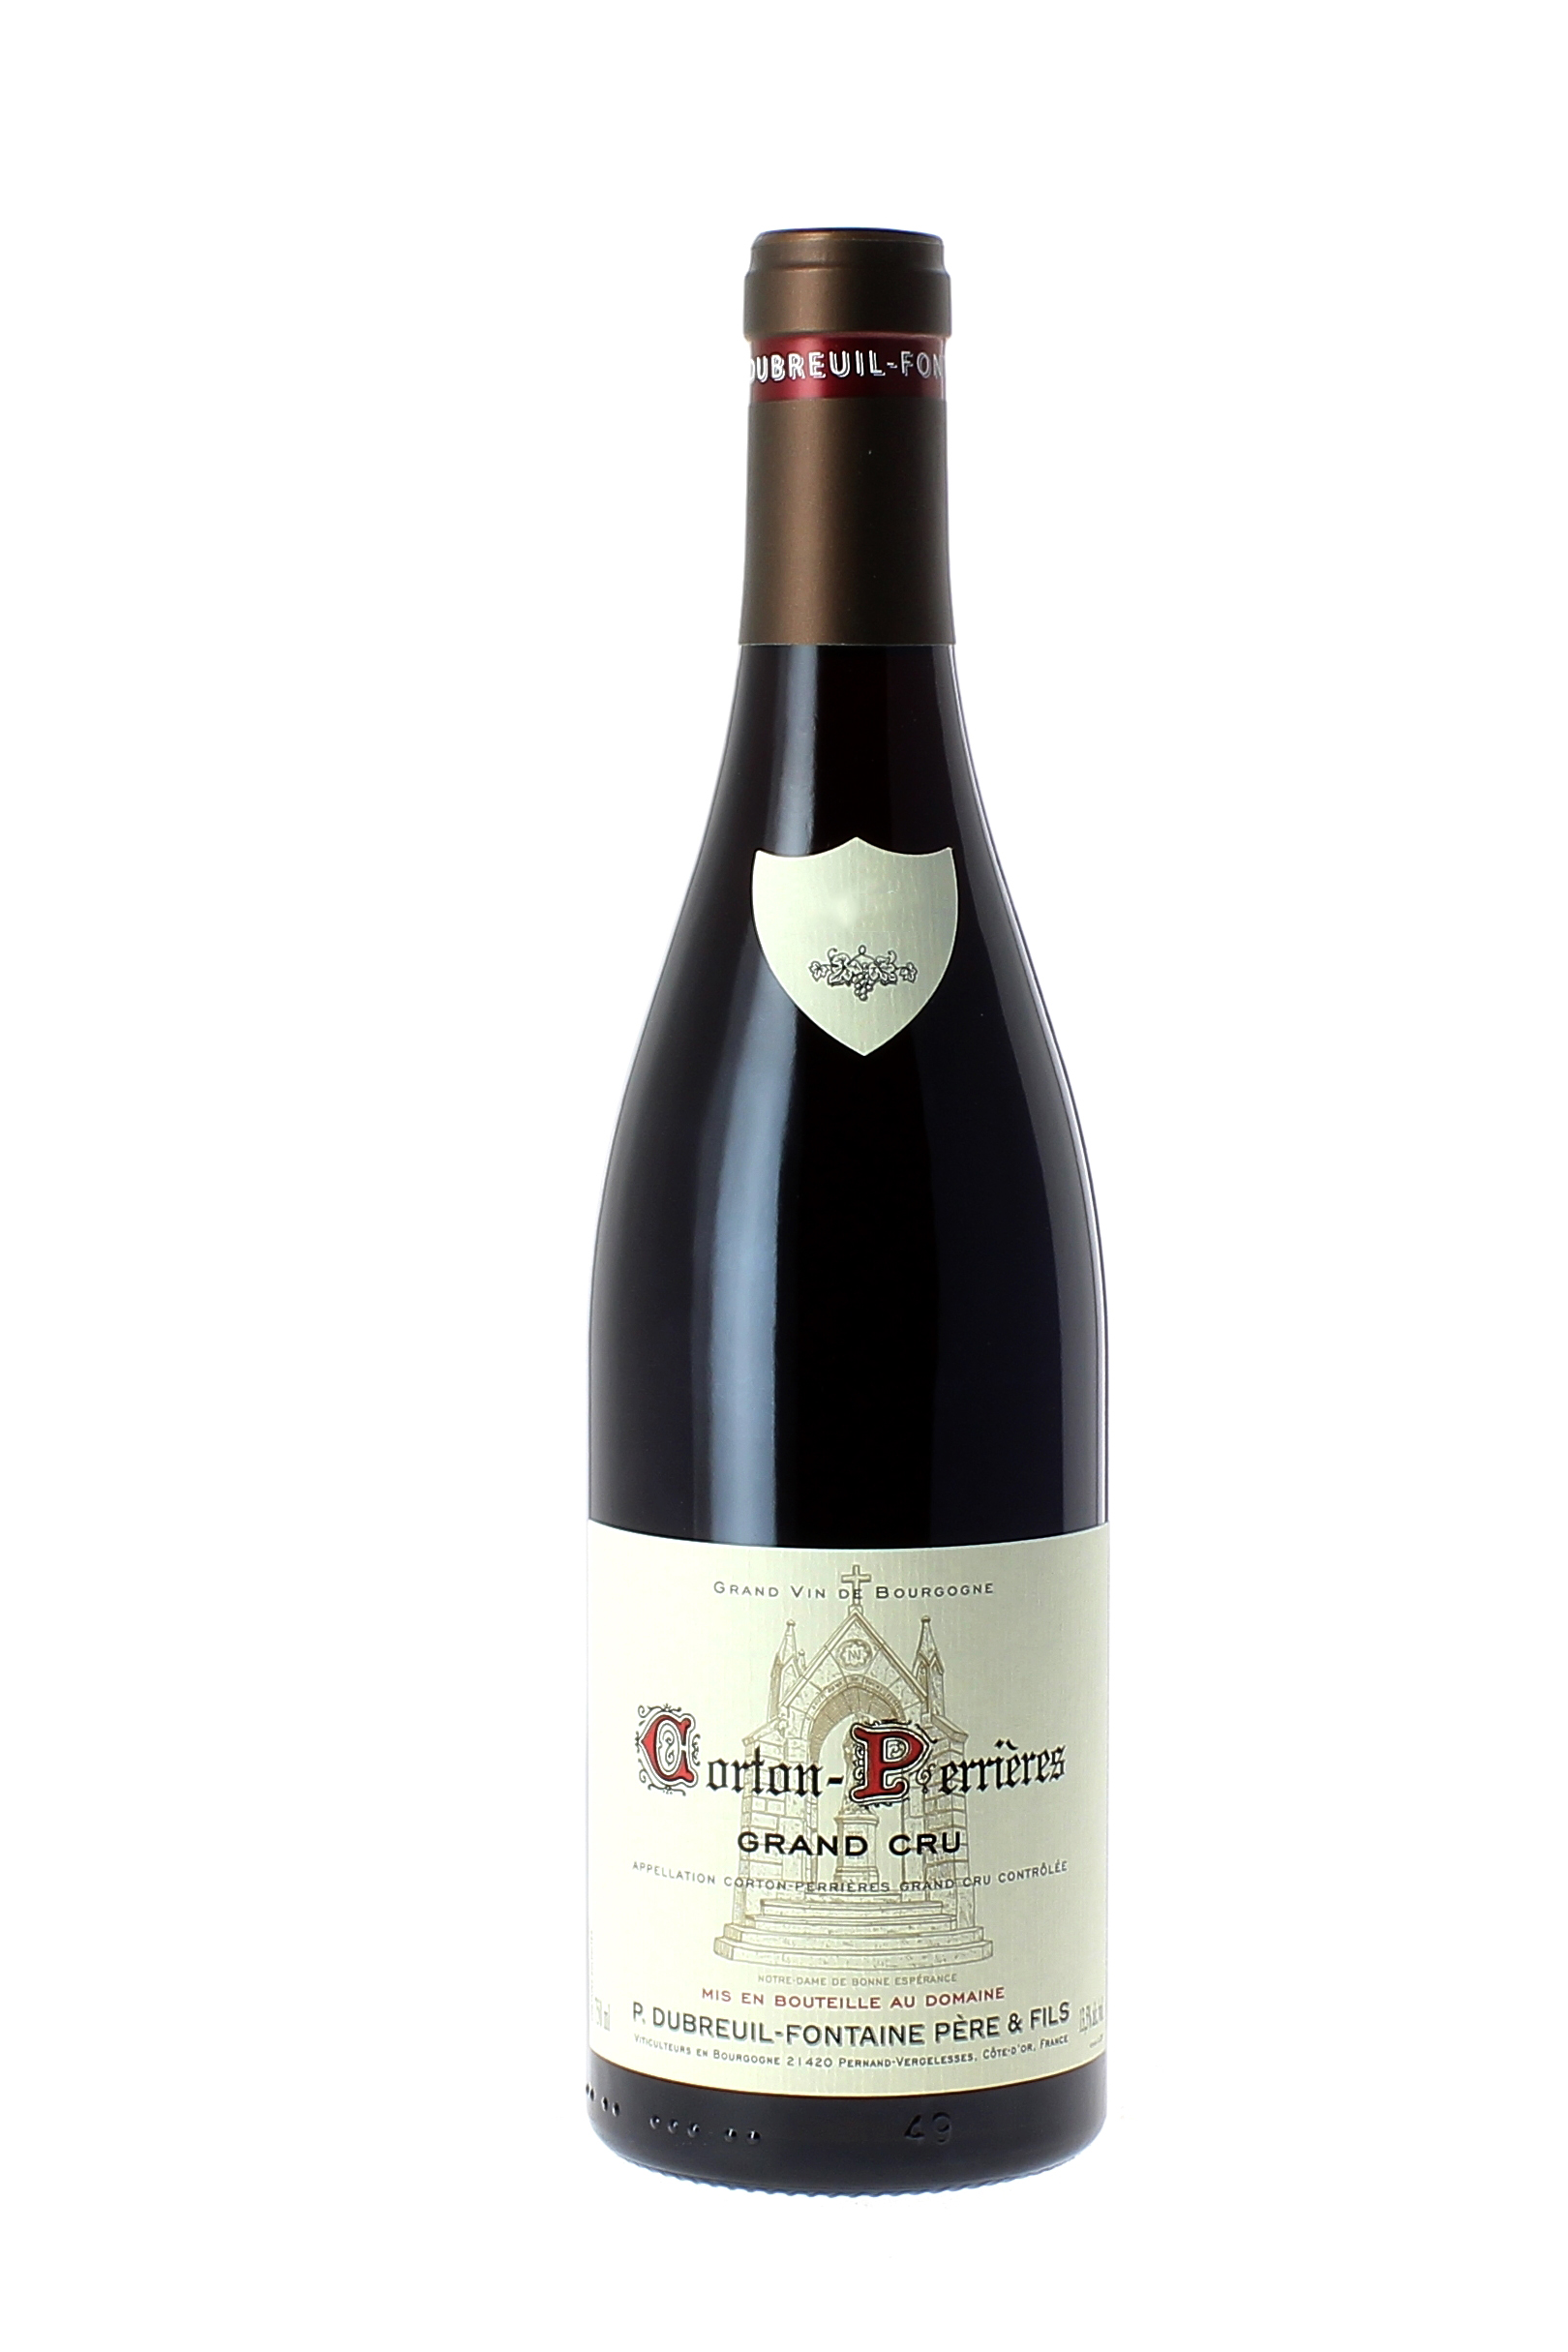 Corton perrires grand cru 2015 Domaine DUBREUIL FONTAINE, Bourgogne rouge